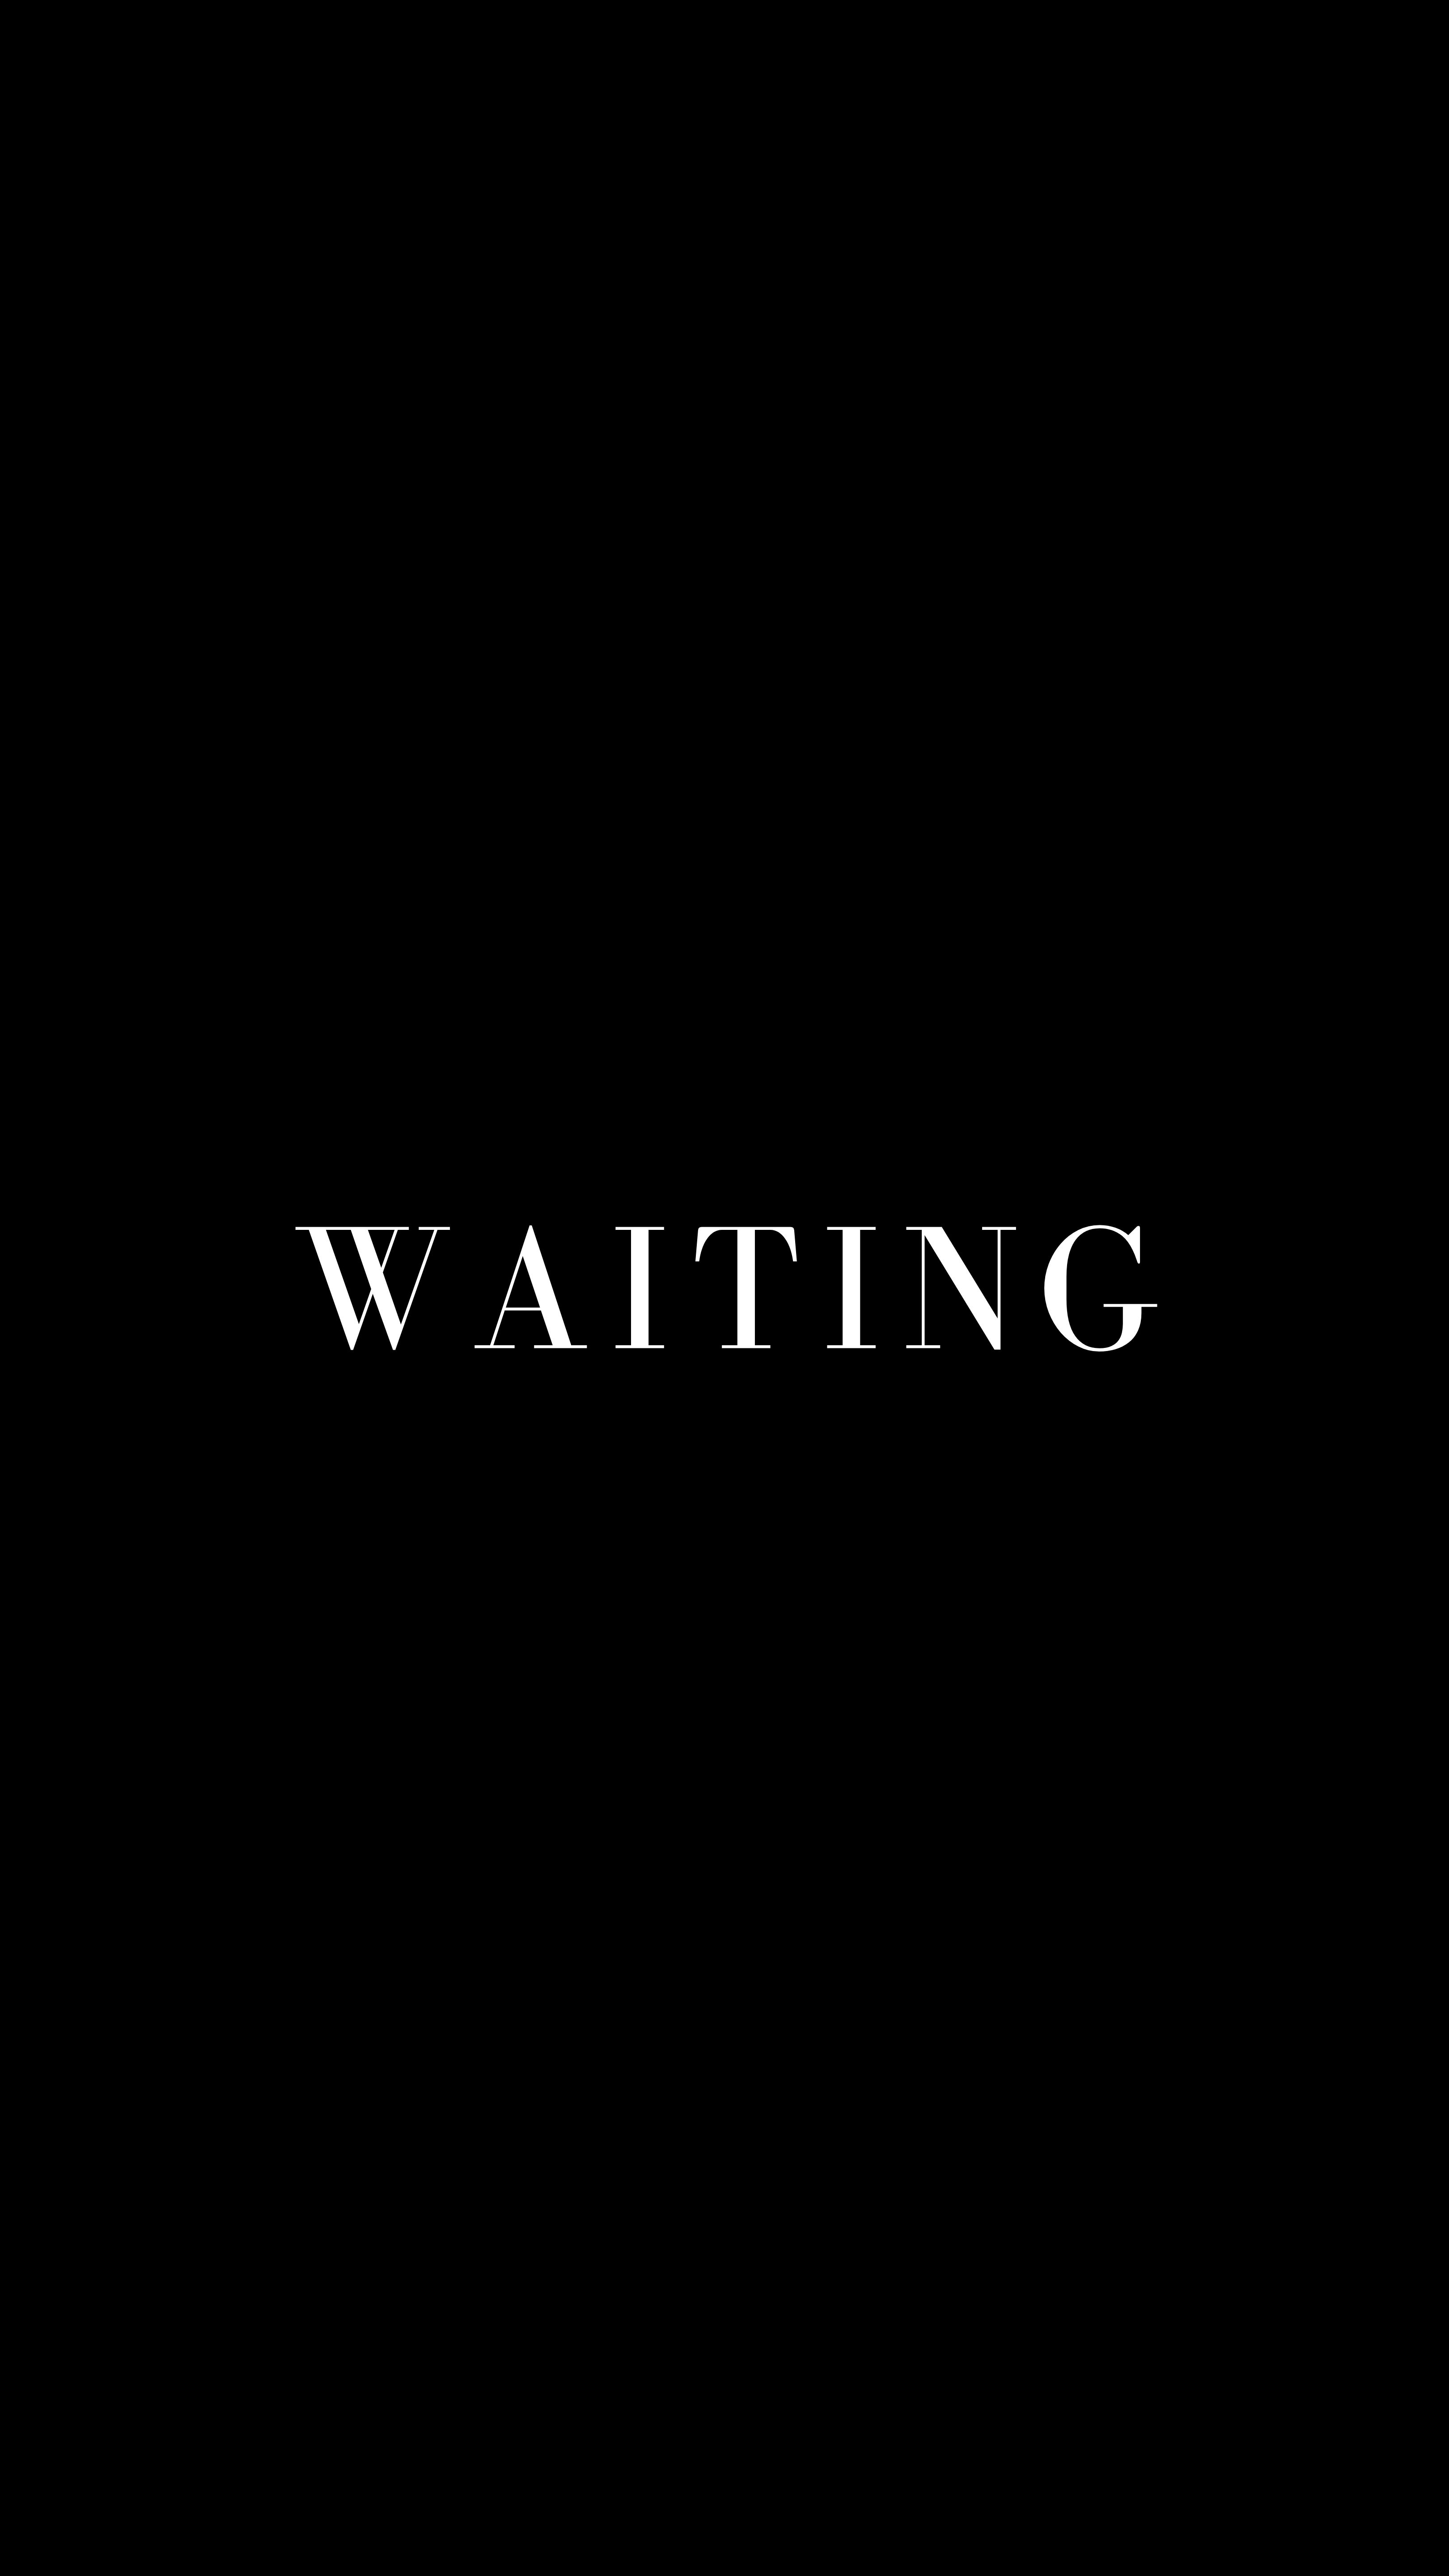 chb, bw, waiting, words, word, expectation